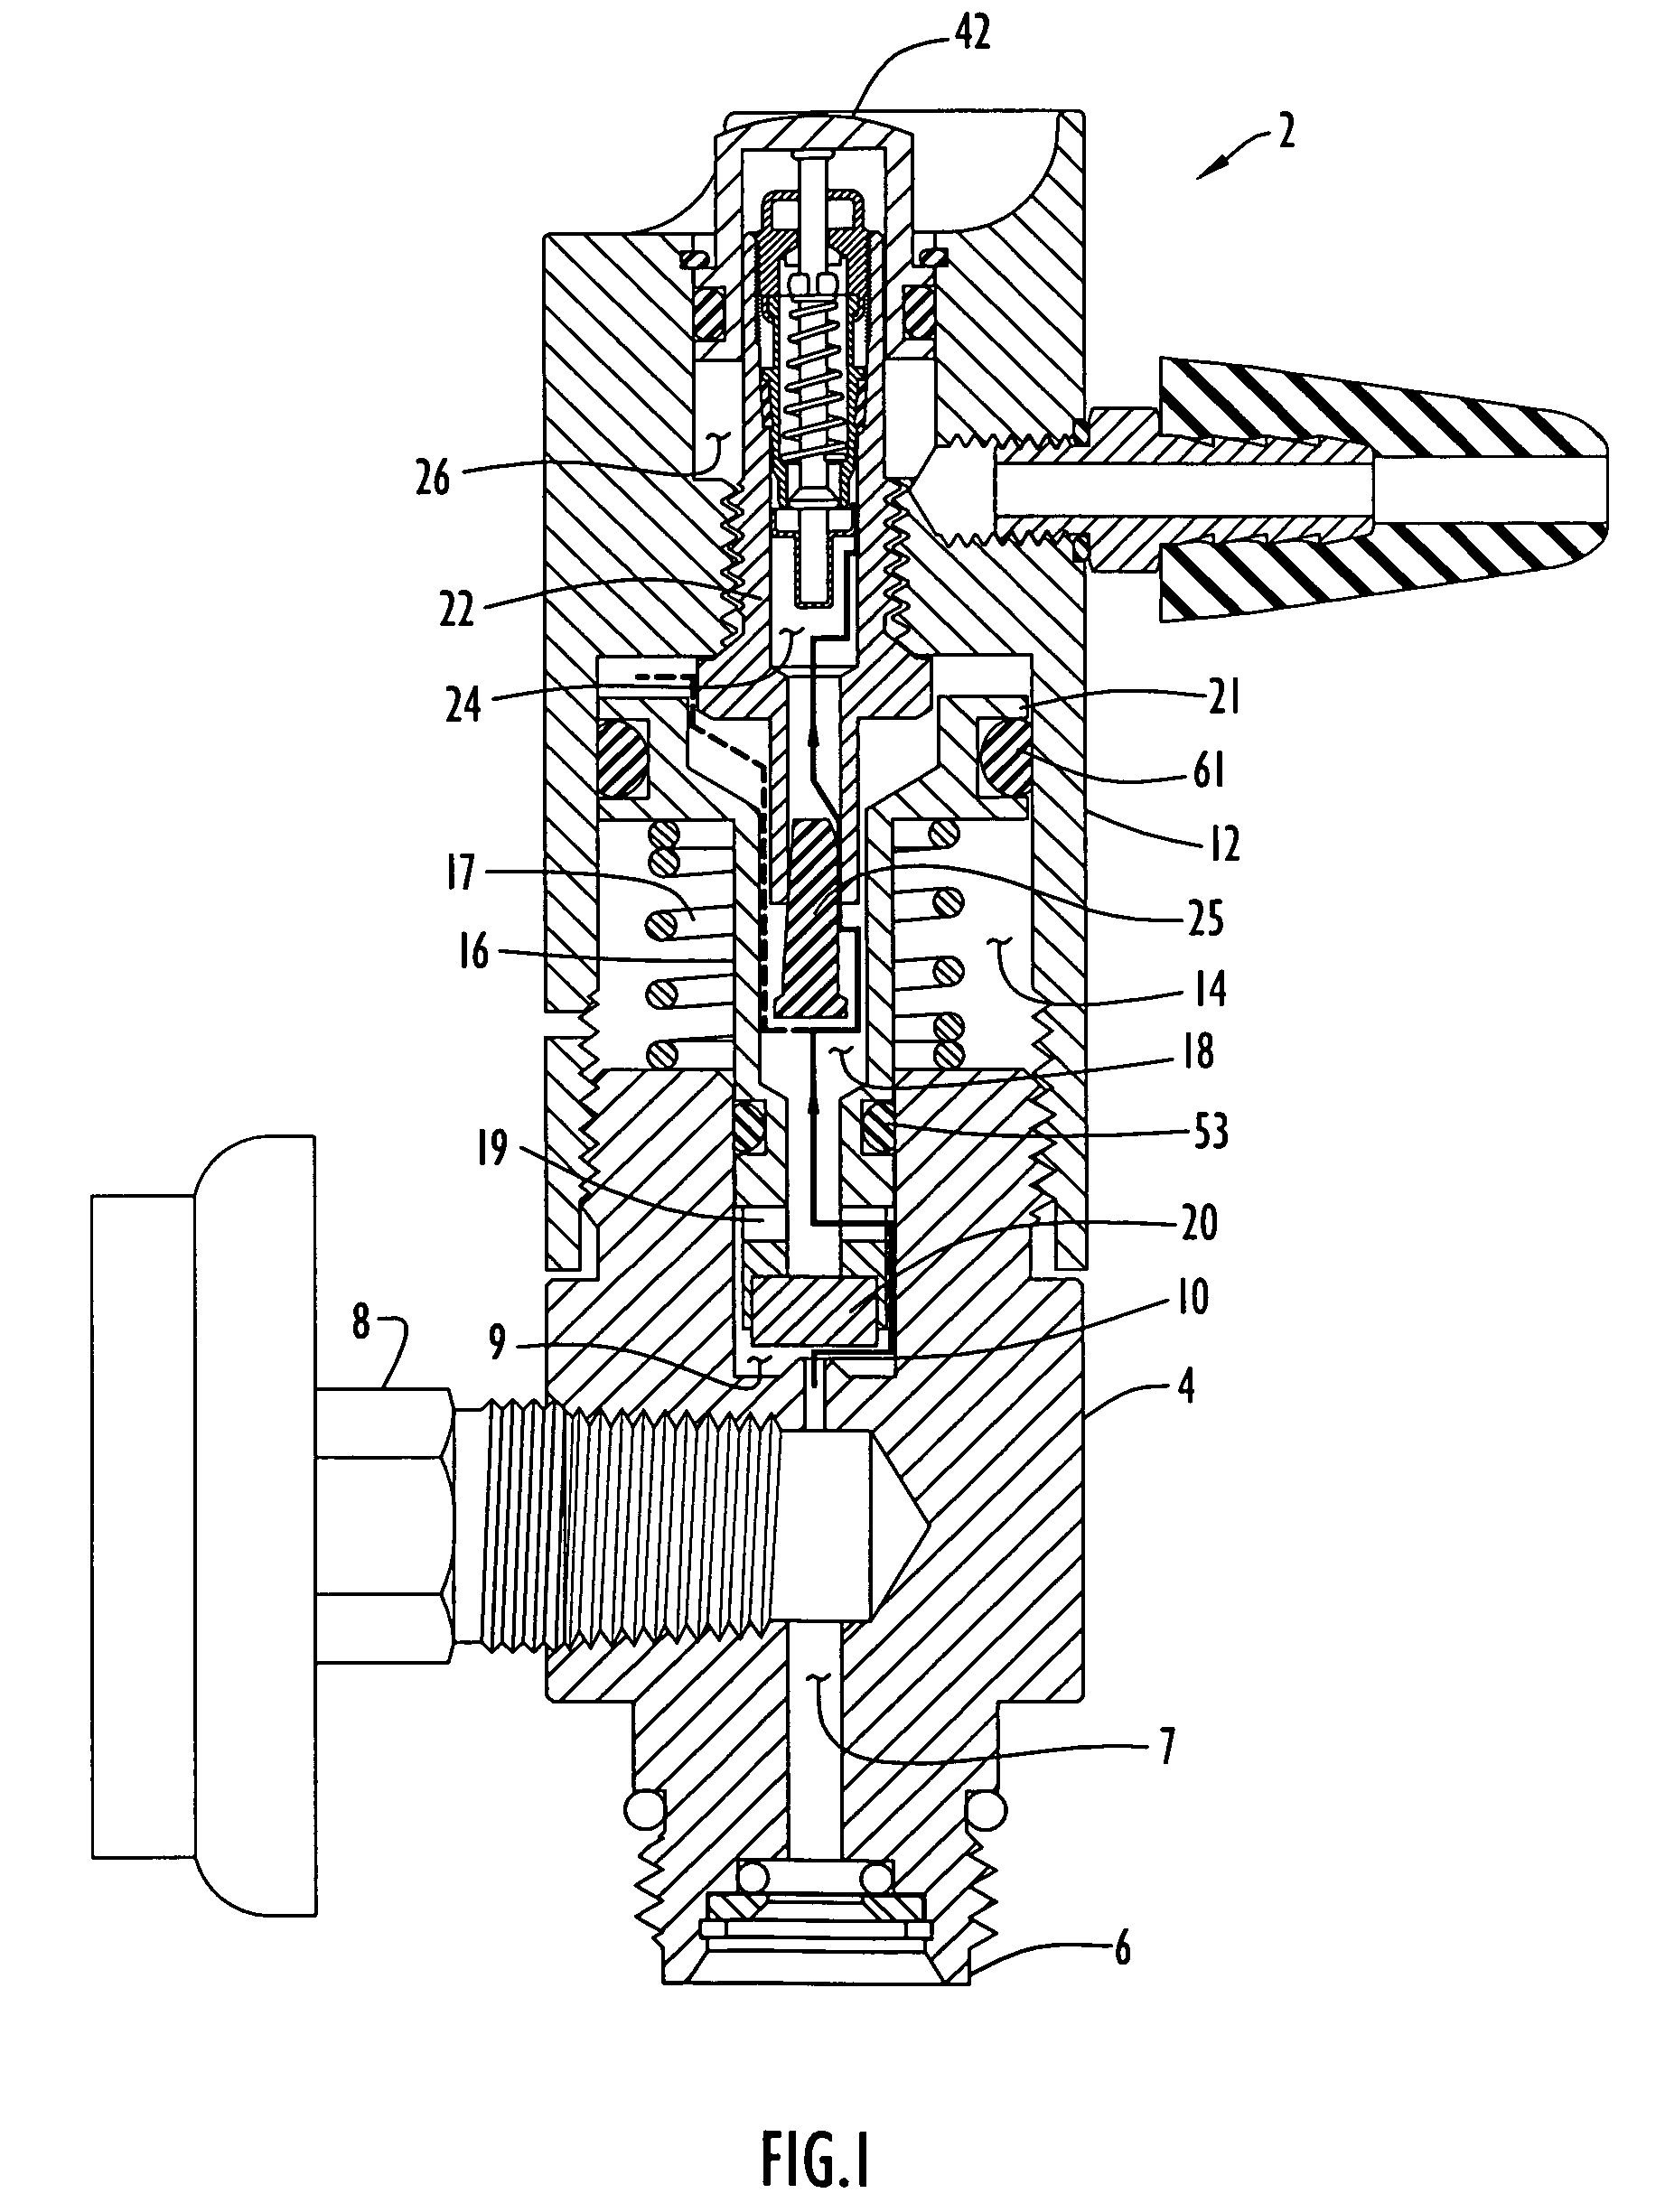 Push button regulator device with sealing element to facilitate easy connection with other devices